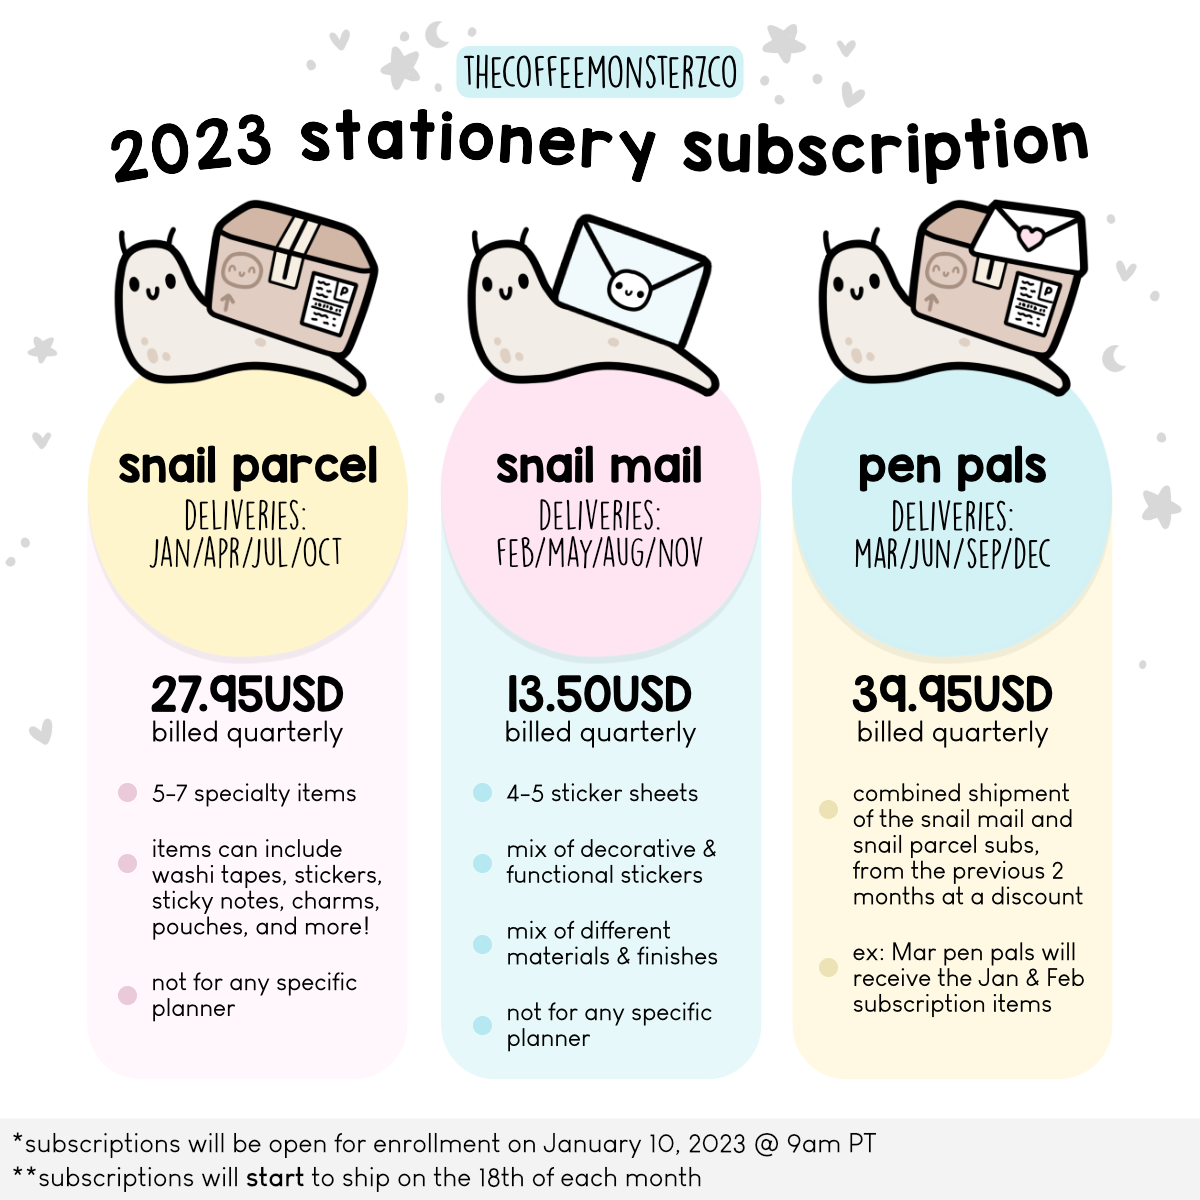 Pen Pal Stationery Subscription (MUST BE PURCHASED ALONE)